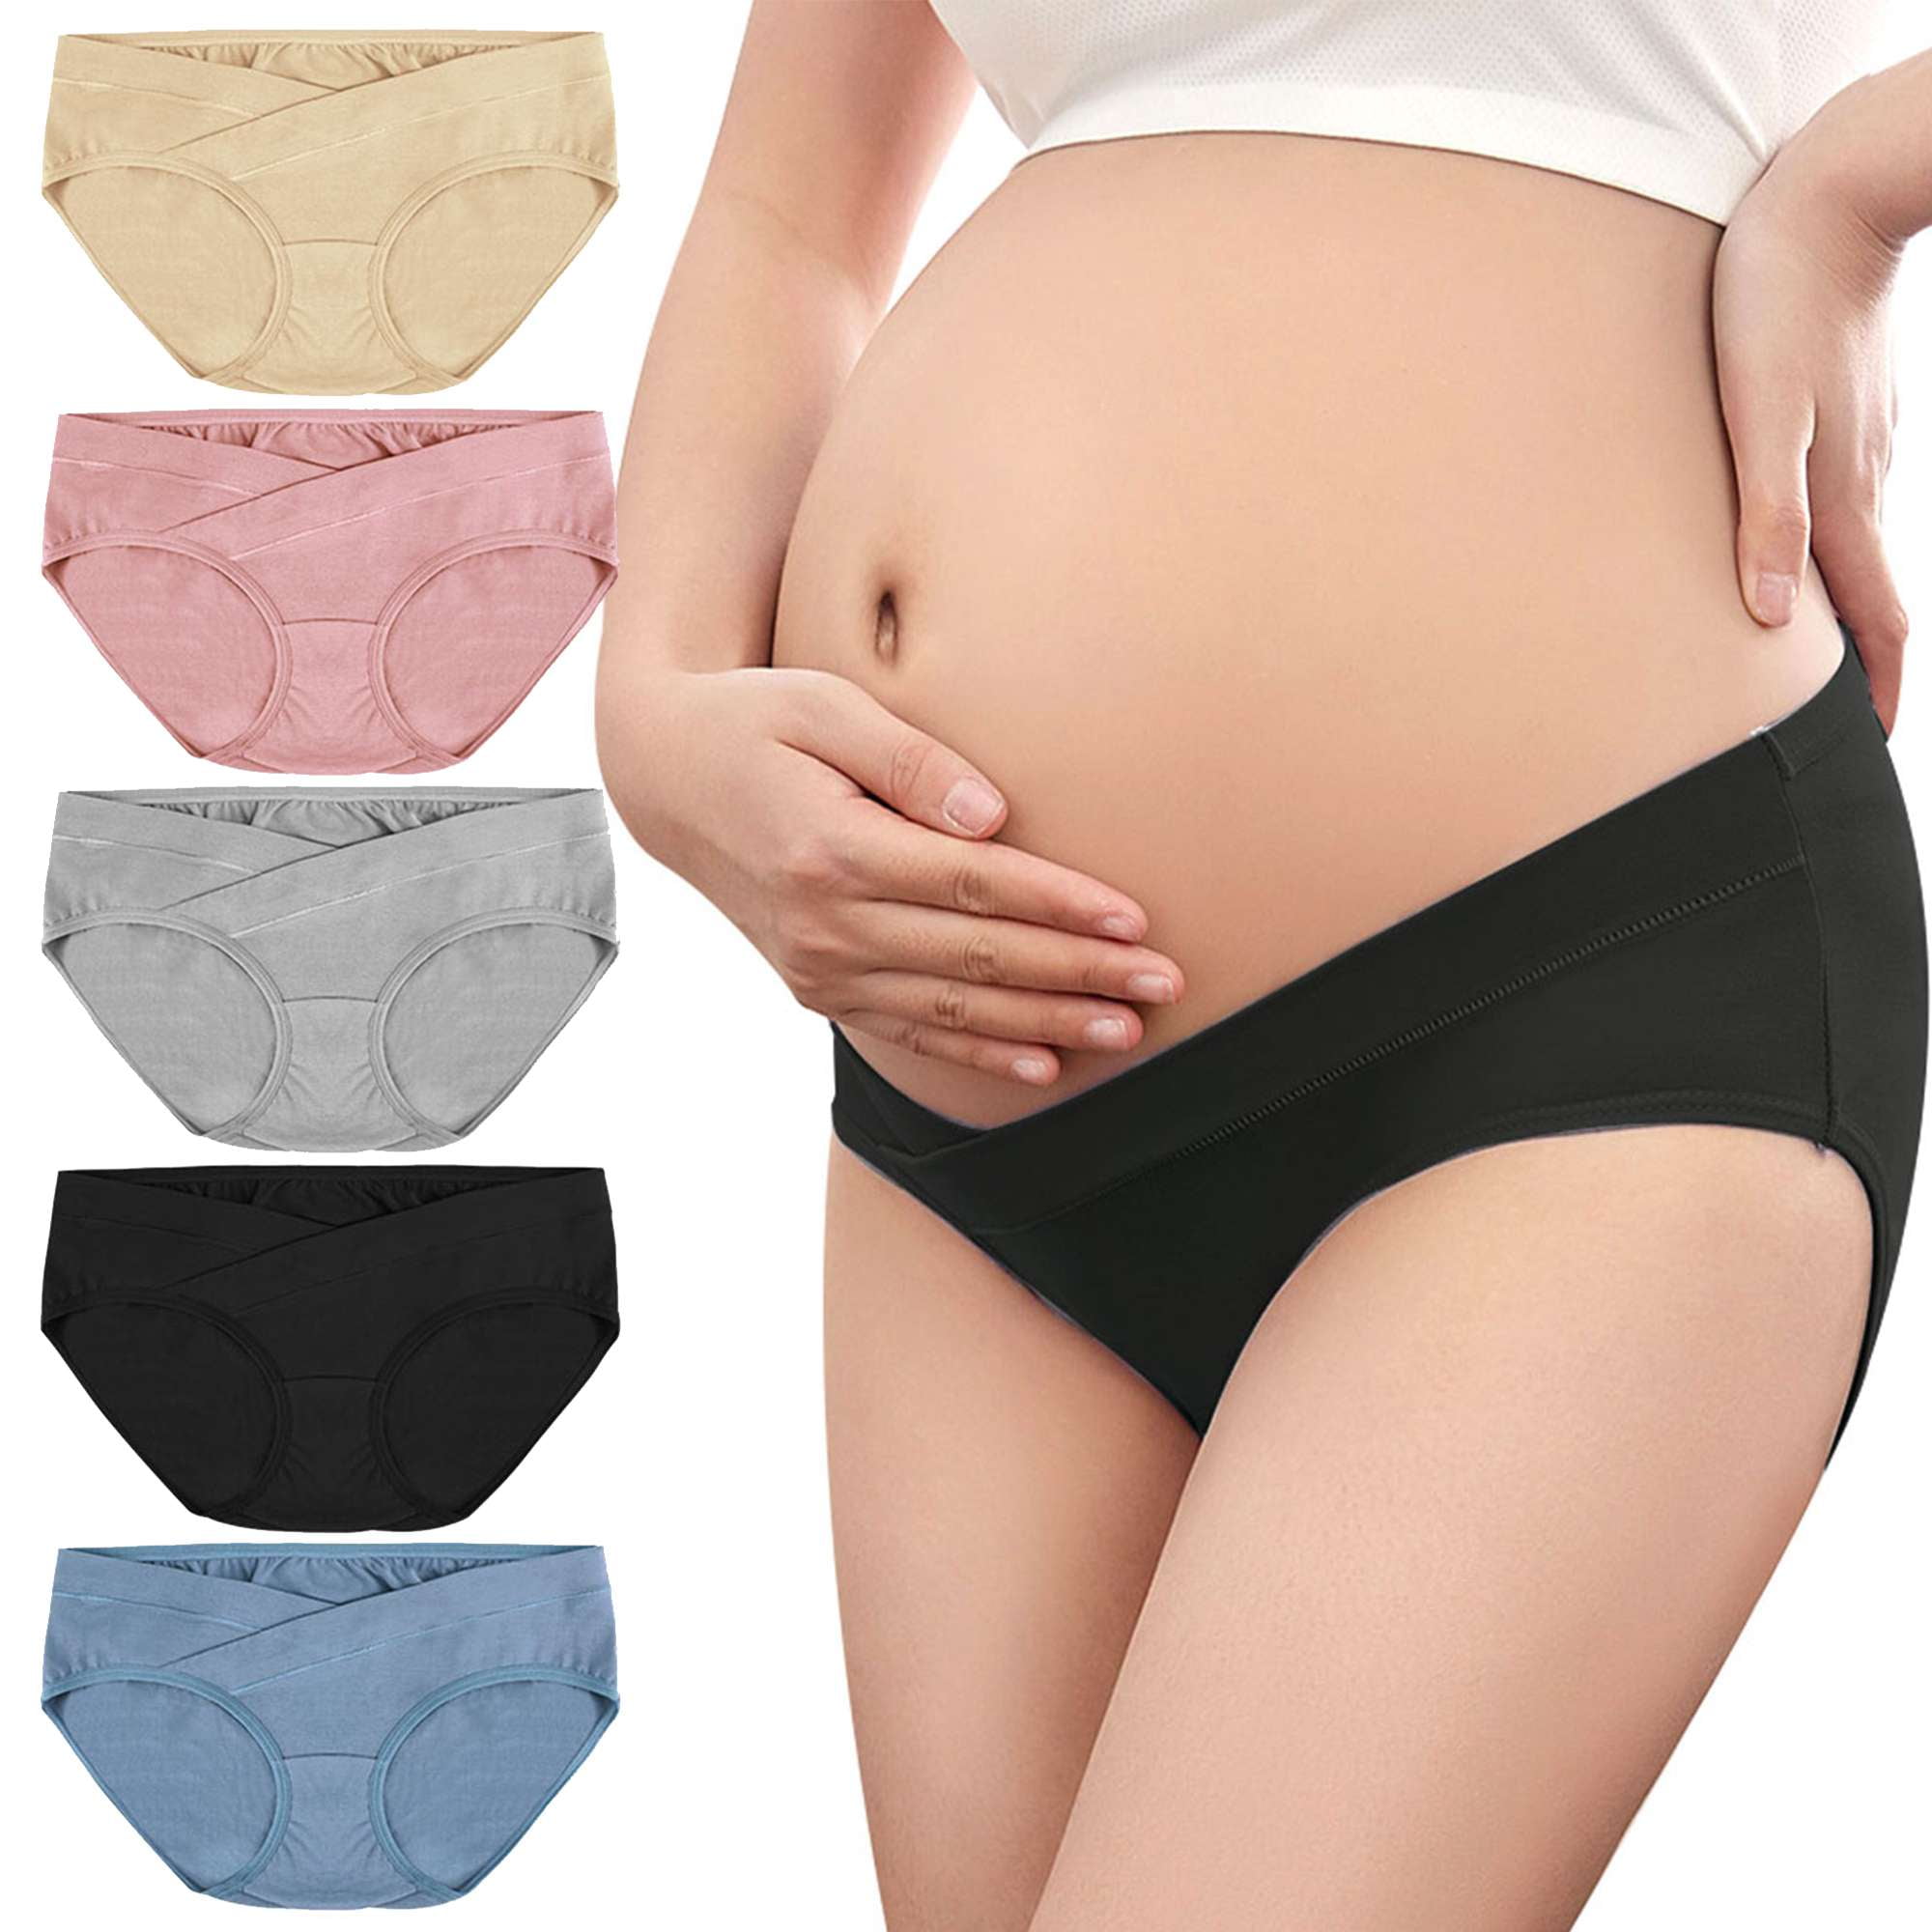 INNERSY Womens Underwear Packs Cotton Hipster Panties Mid/Low Rise